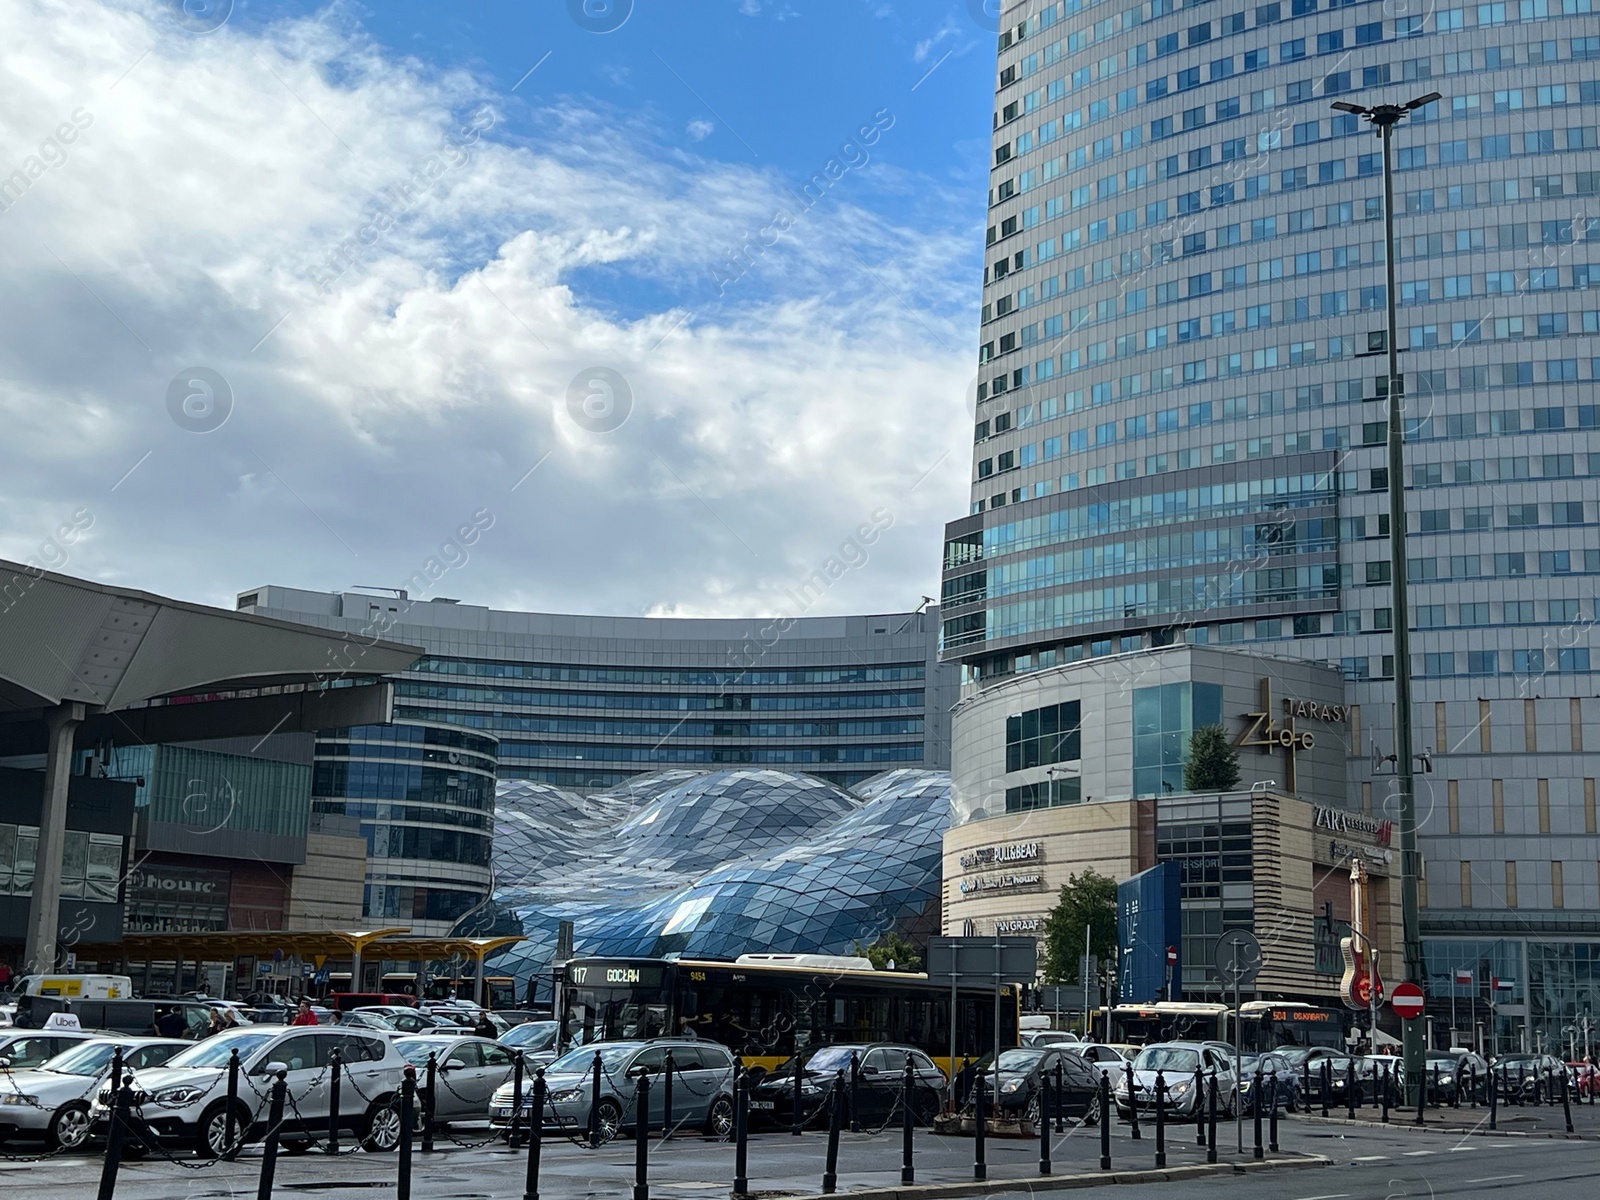 Photo of WARSAW, POLAND - JULY 17, 2022: View of shopping mall and parked cars outdoors